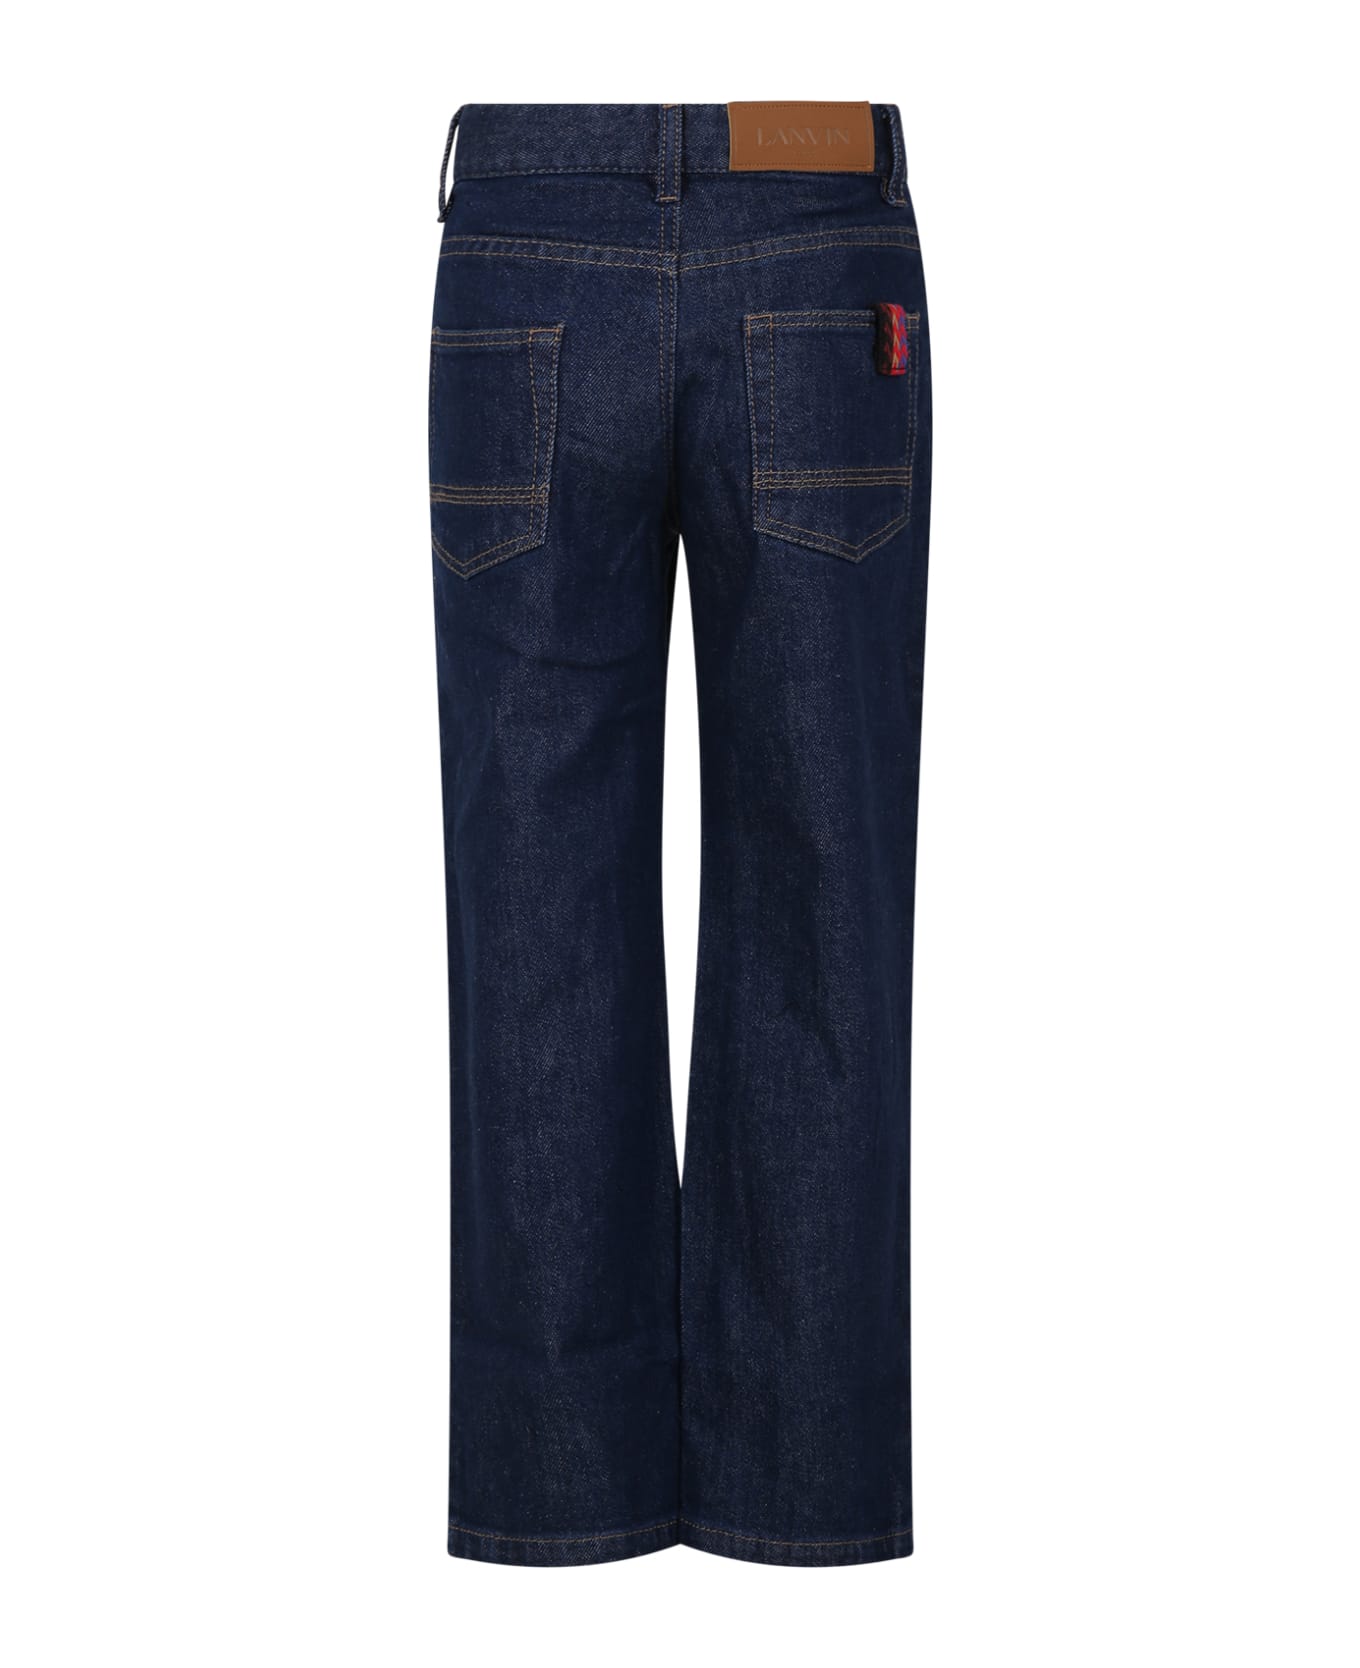 Lanvin Light-blue Jeans For Boy With Embroidered Logo - Denim ボトムス